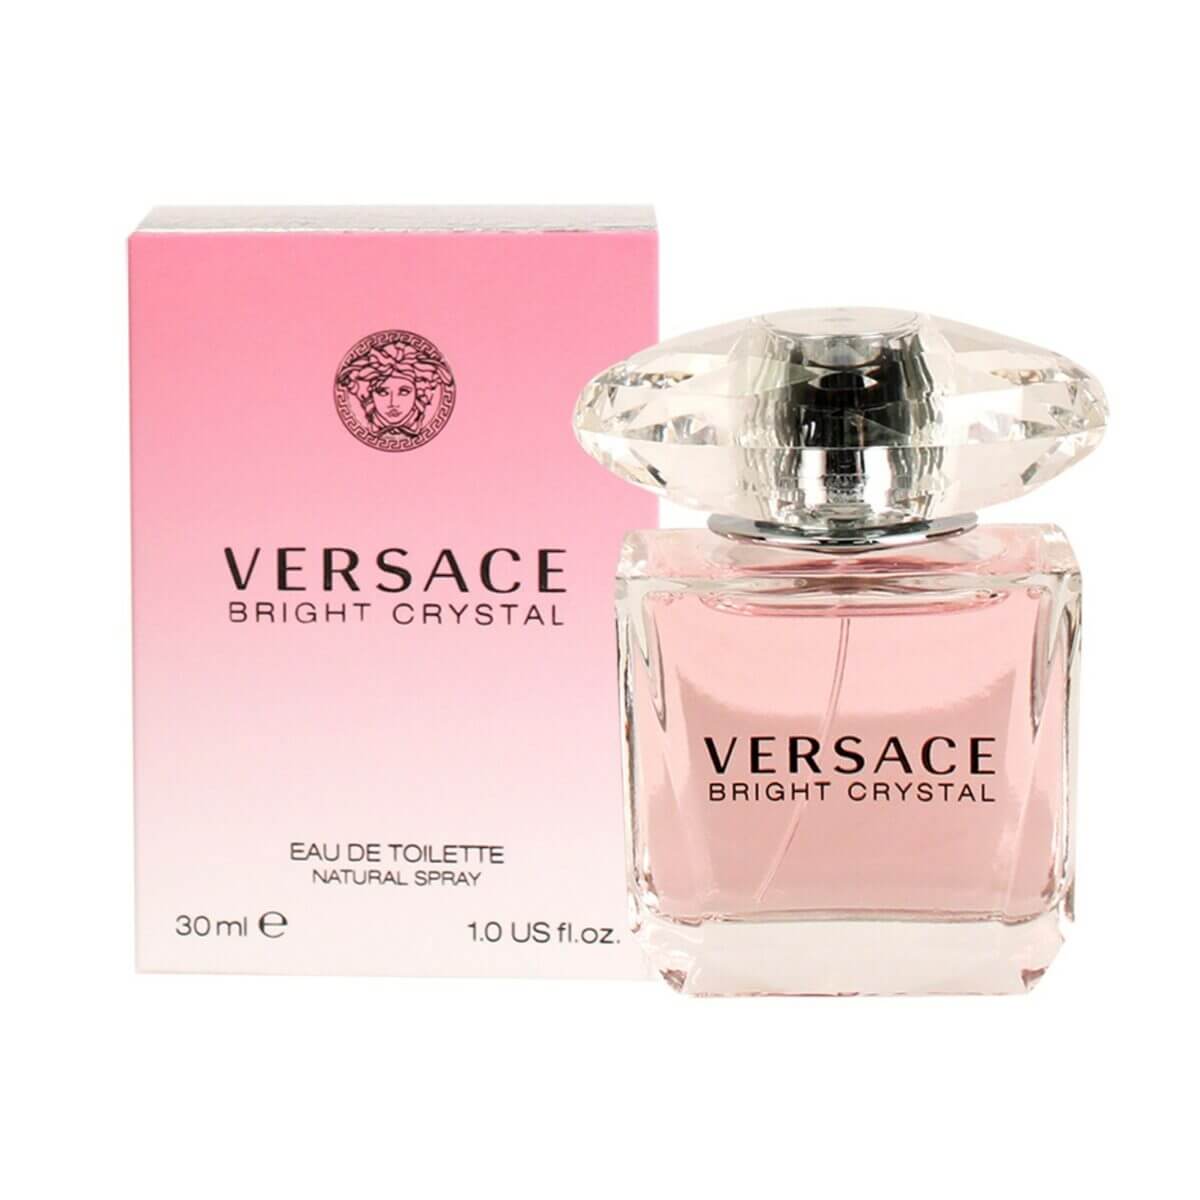 VERSACE Bright Crystal for women